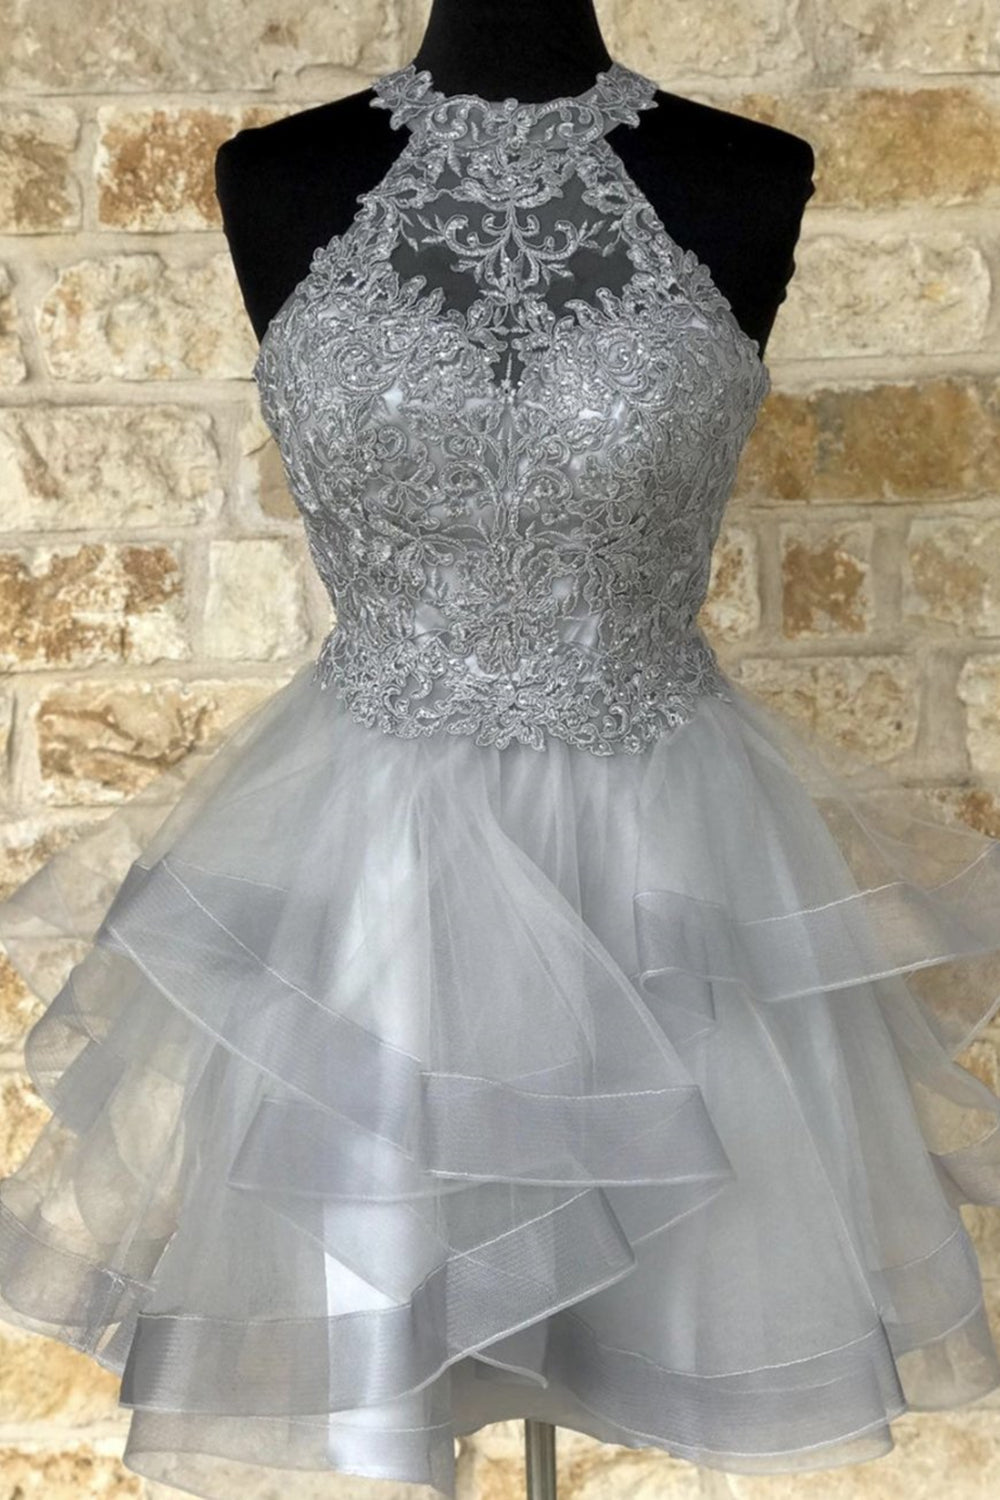 Gray Lace Short Prom Dresses, Fluffy Gray Lace Homecoming Dresses, Gray Formal Evening Dresses EP1372